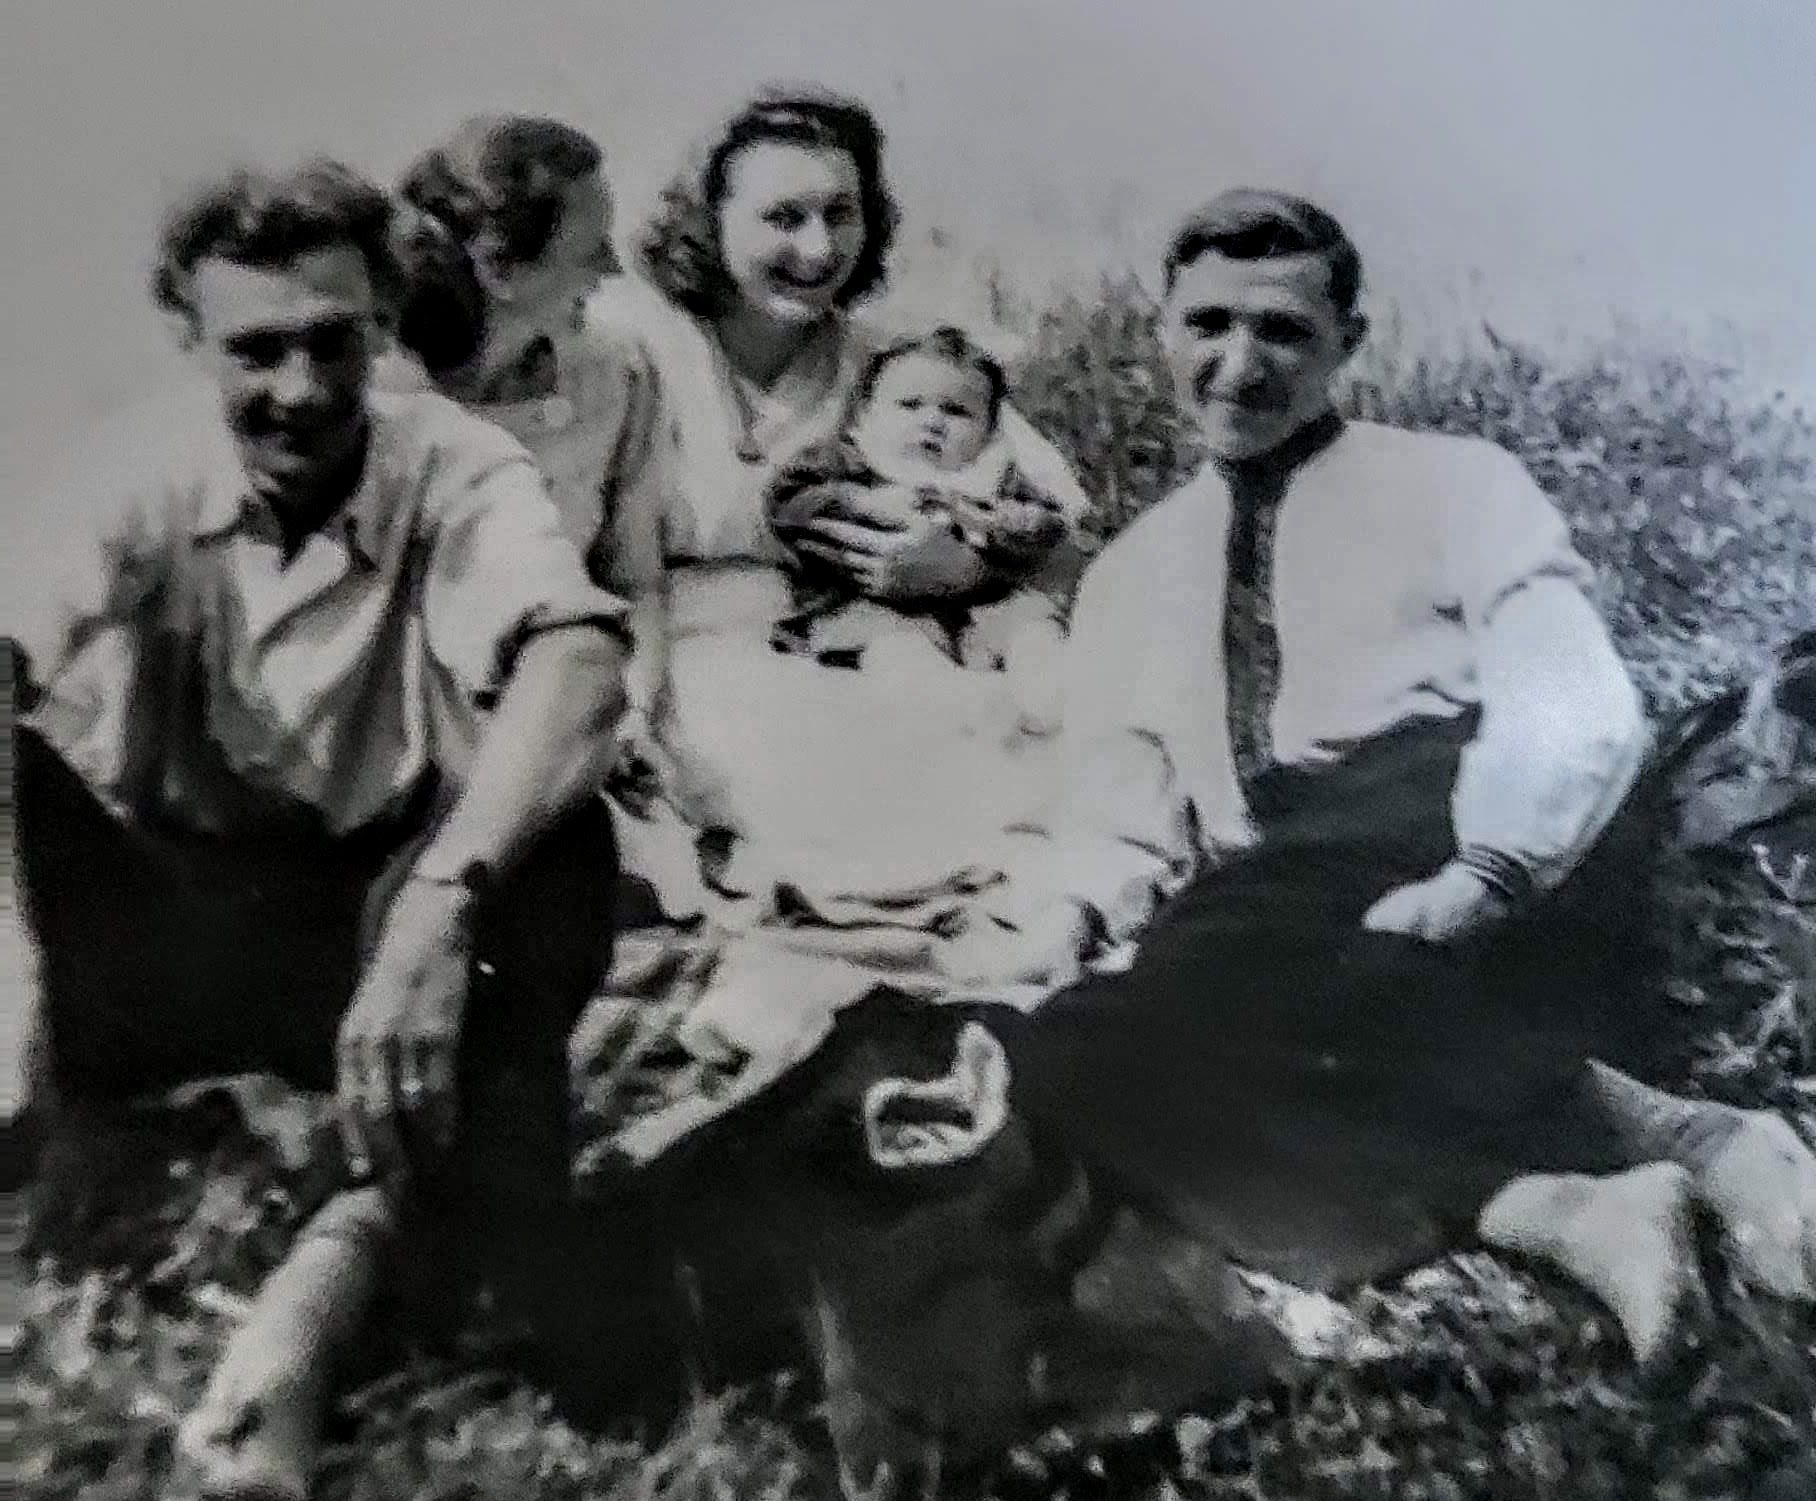 My grandparents and mother (child) with friends in Salzburg 1947/48